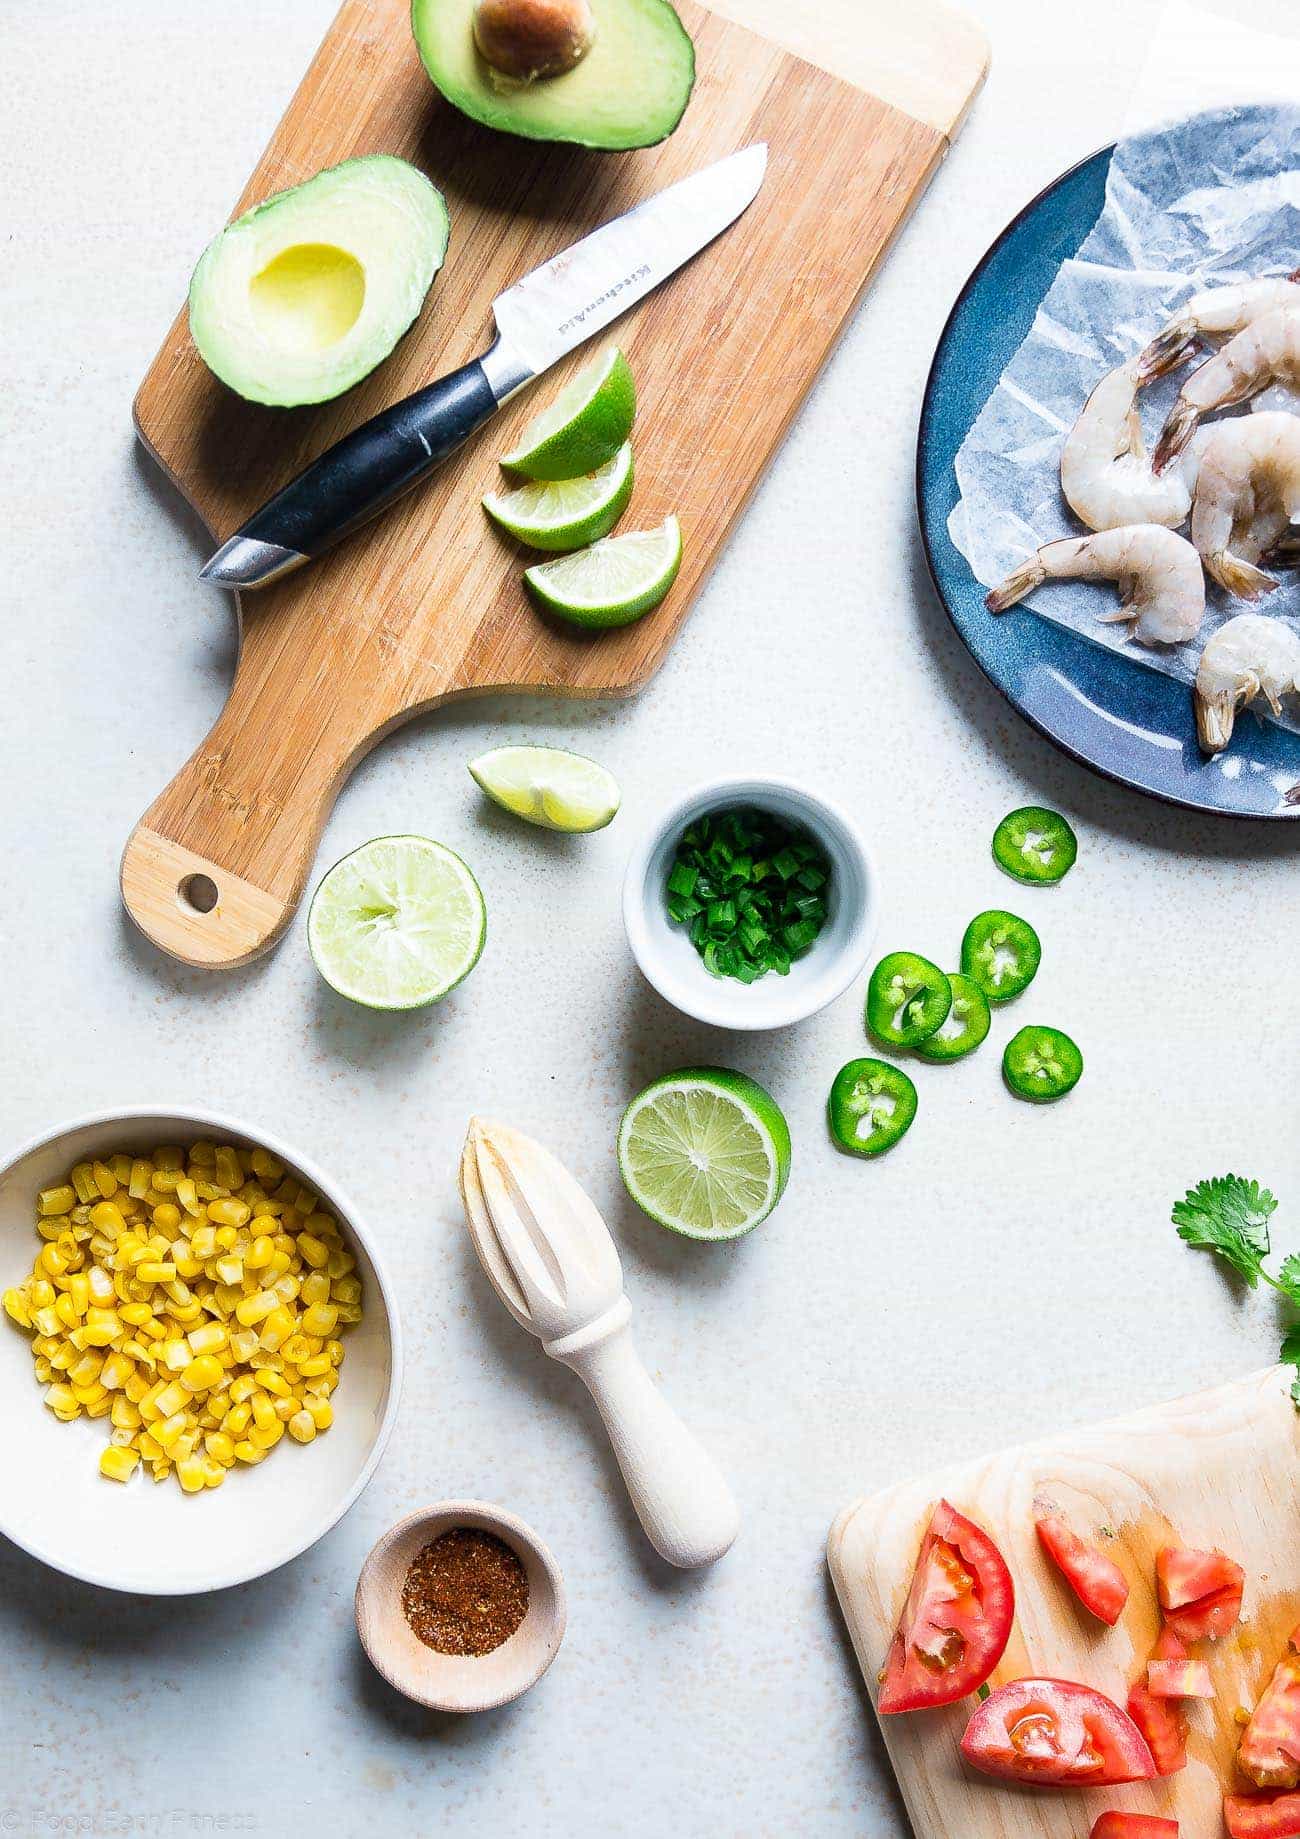 Healthy Honey Lime Grilled Mexican Corn Salad with Shrimp - This quick and easy, gluten free salad is tossed with juicy, smoky shrimp and has a sweet and tangy honey lime vinaigrette! Perfect for summer cook outs! | Foodfaithfitness.com | @FoodFaithFit